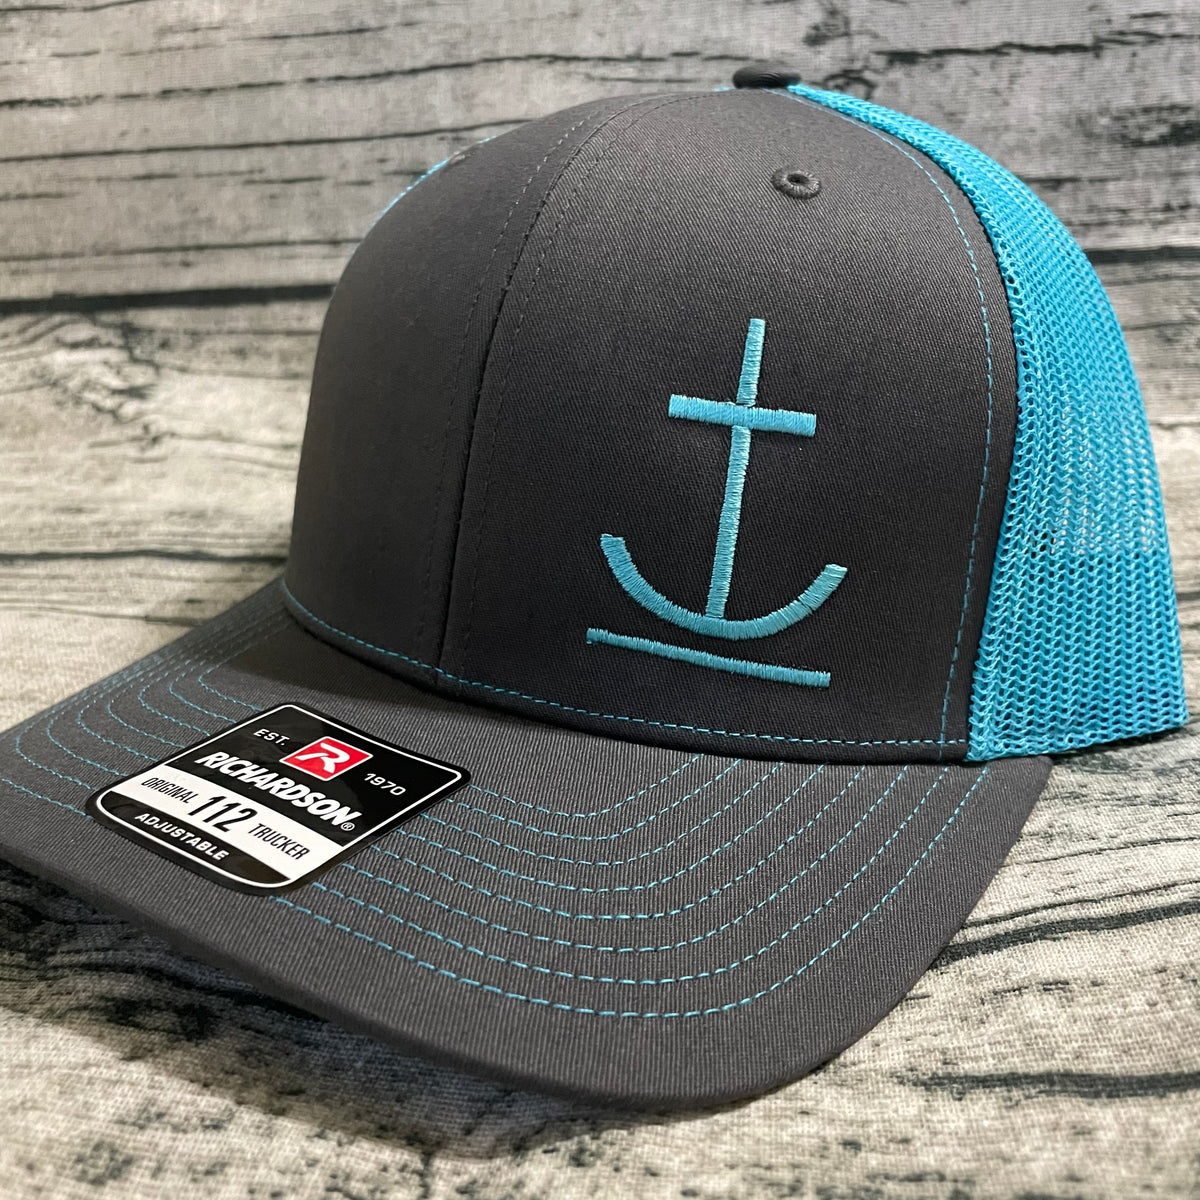 Anchor Brand Embroidered Hats